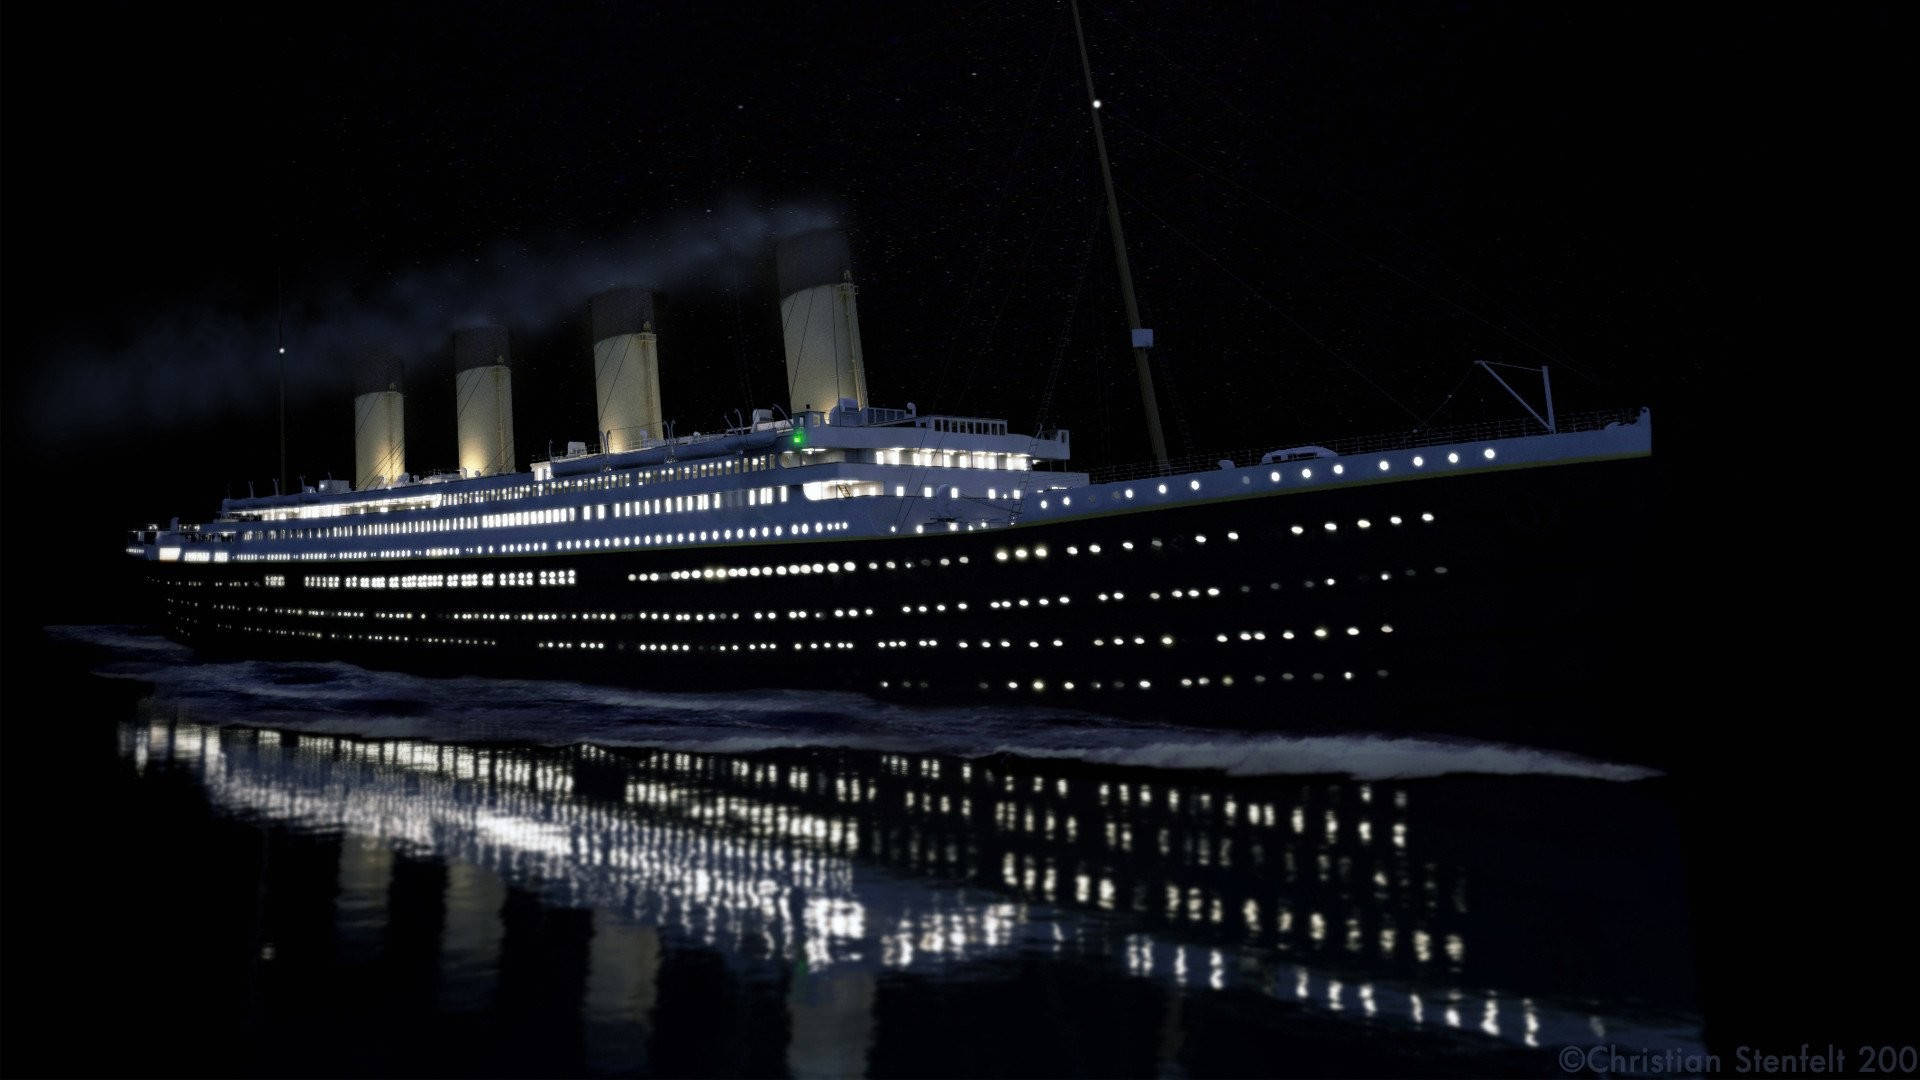 Free Titanic Wallpaper Downloads, [100+] Titanic Wallpapers for FREE |  